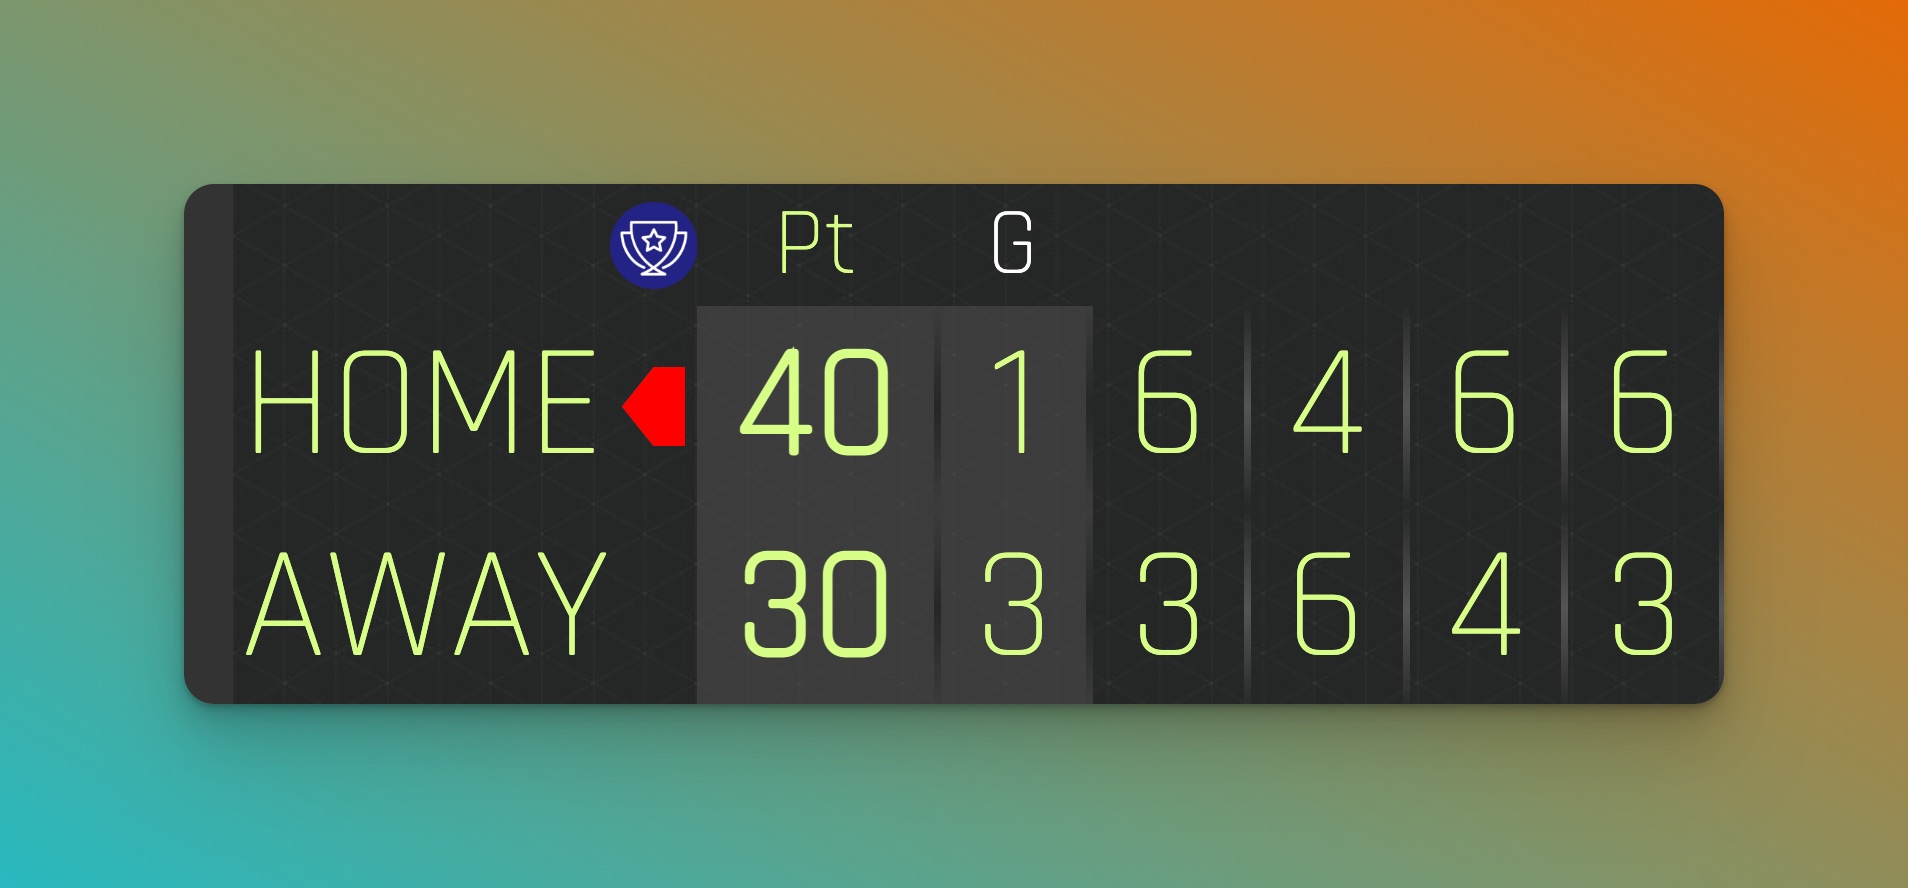 A tennis scoreboard being shown on a television